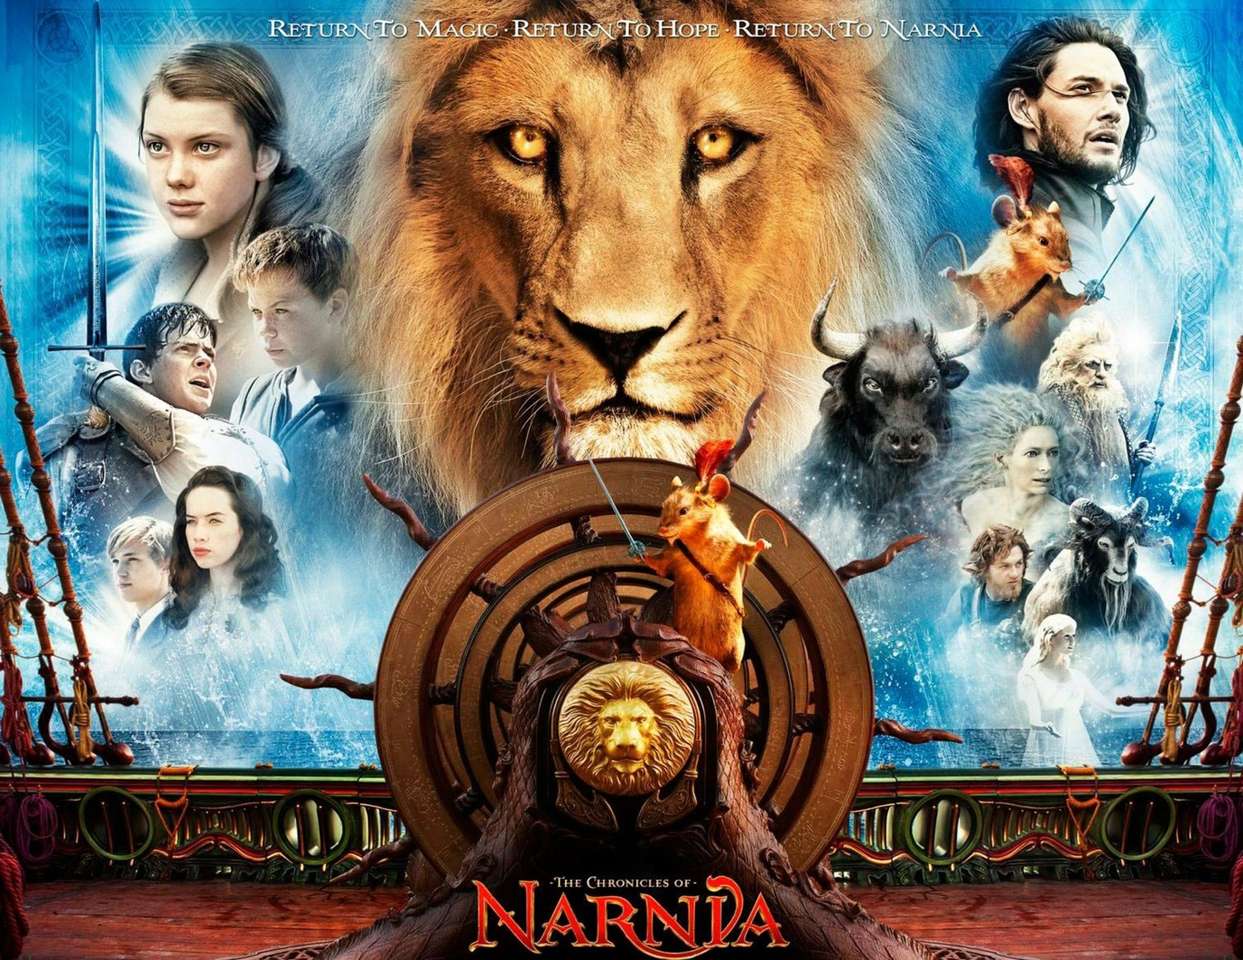 de Chronicles of Narnia online puzzel